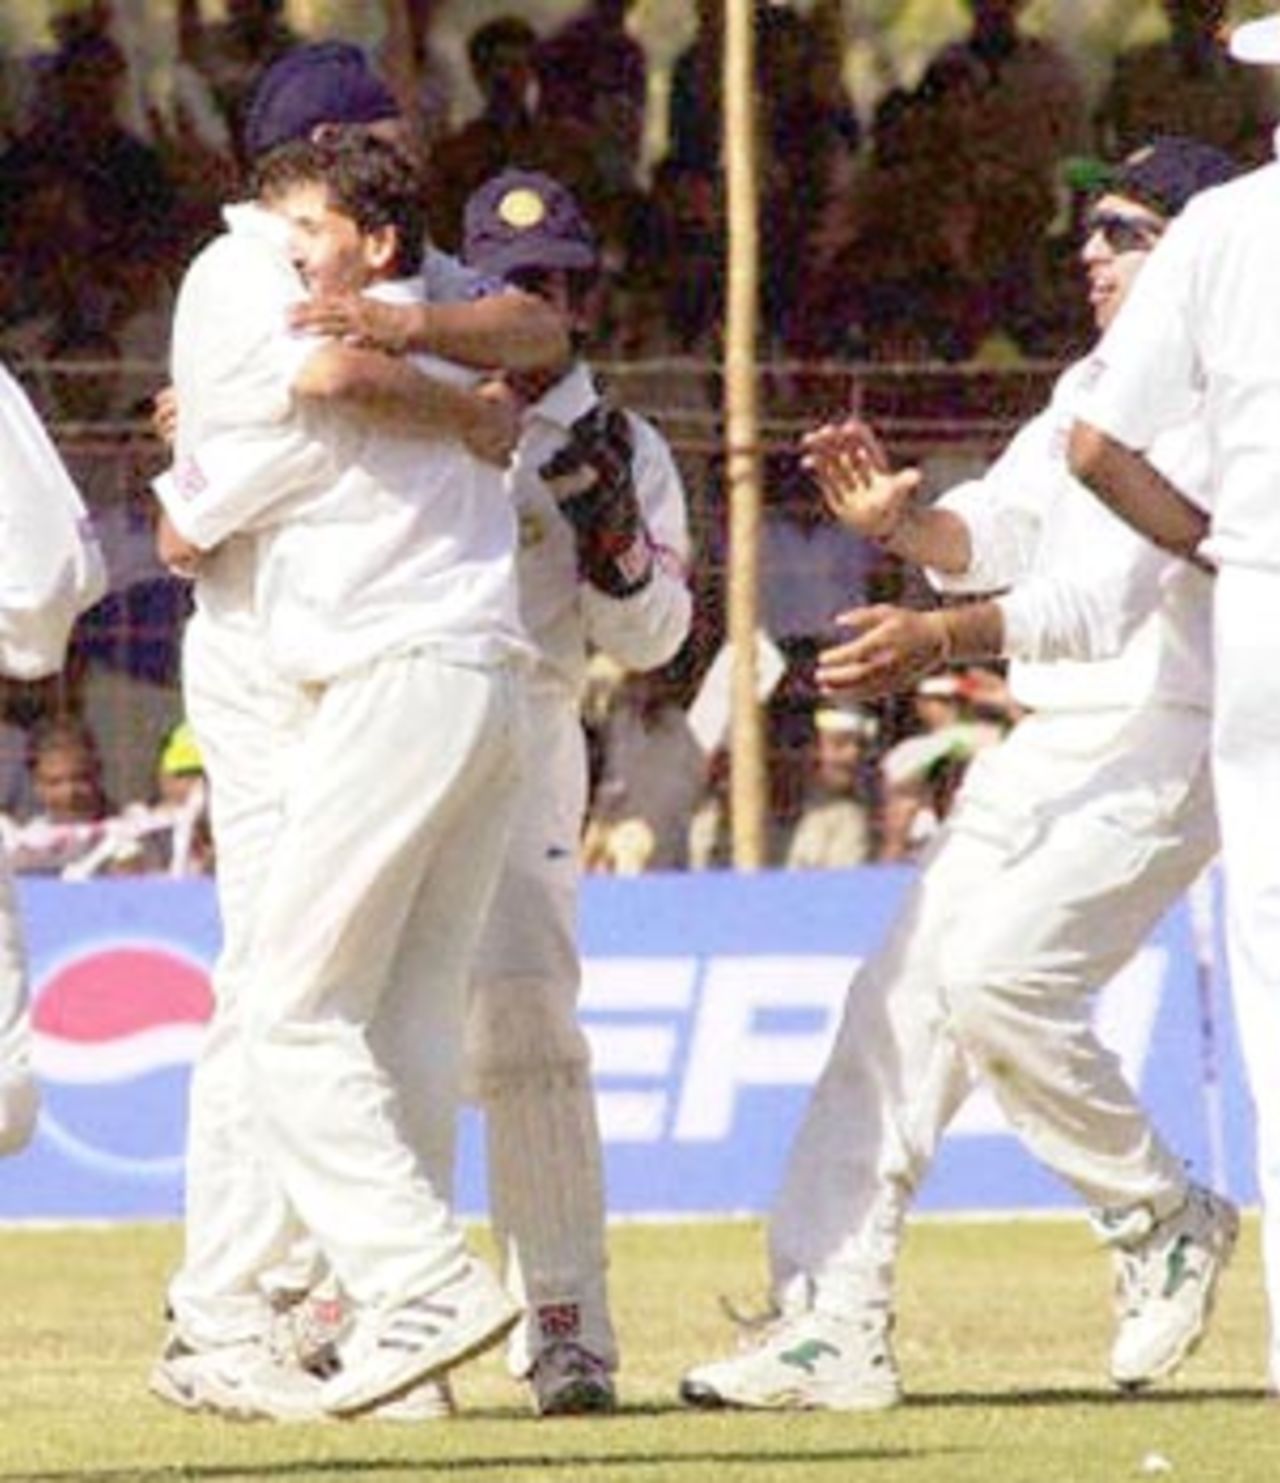 Ajit Agarkar (2nd L) is hugged by a teammate after the final match of the one-day international, 14 December 2000 at the Municipal cricket ground in Rajkot. Agarkar was declared the 'Man of the Match' for having scored 67 runs off 25 balls that helped India win the match and the series.